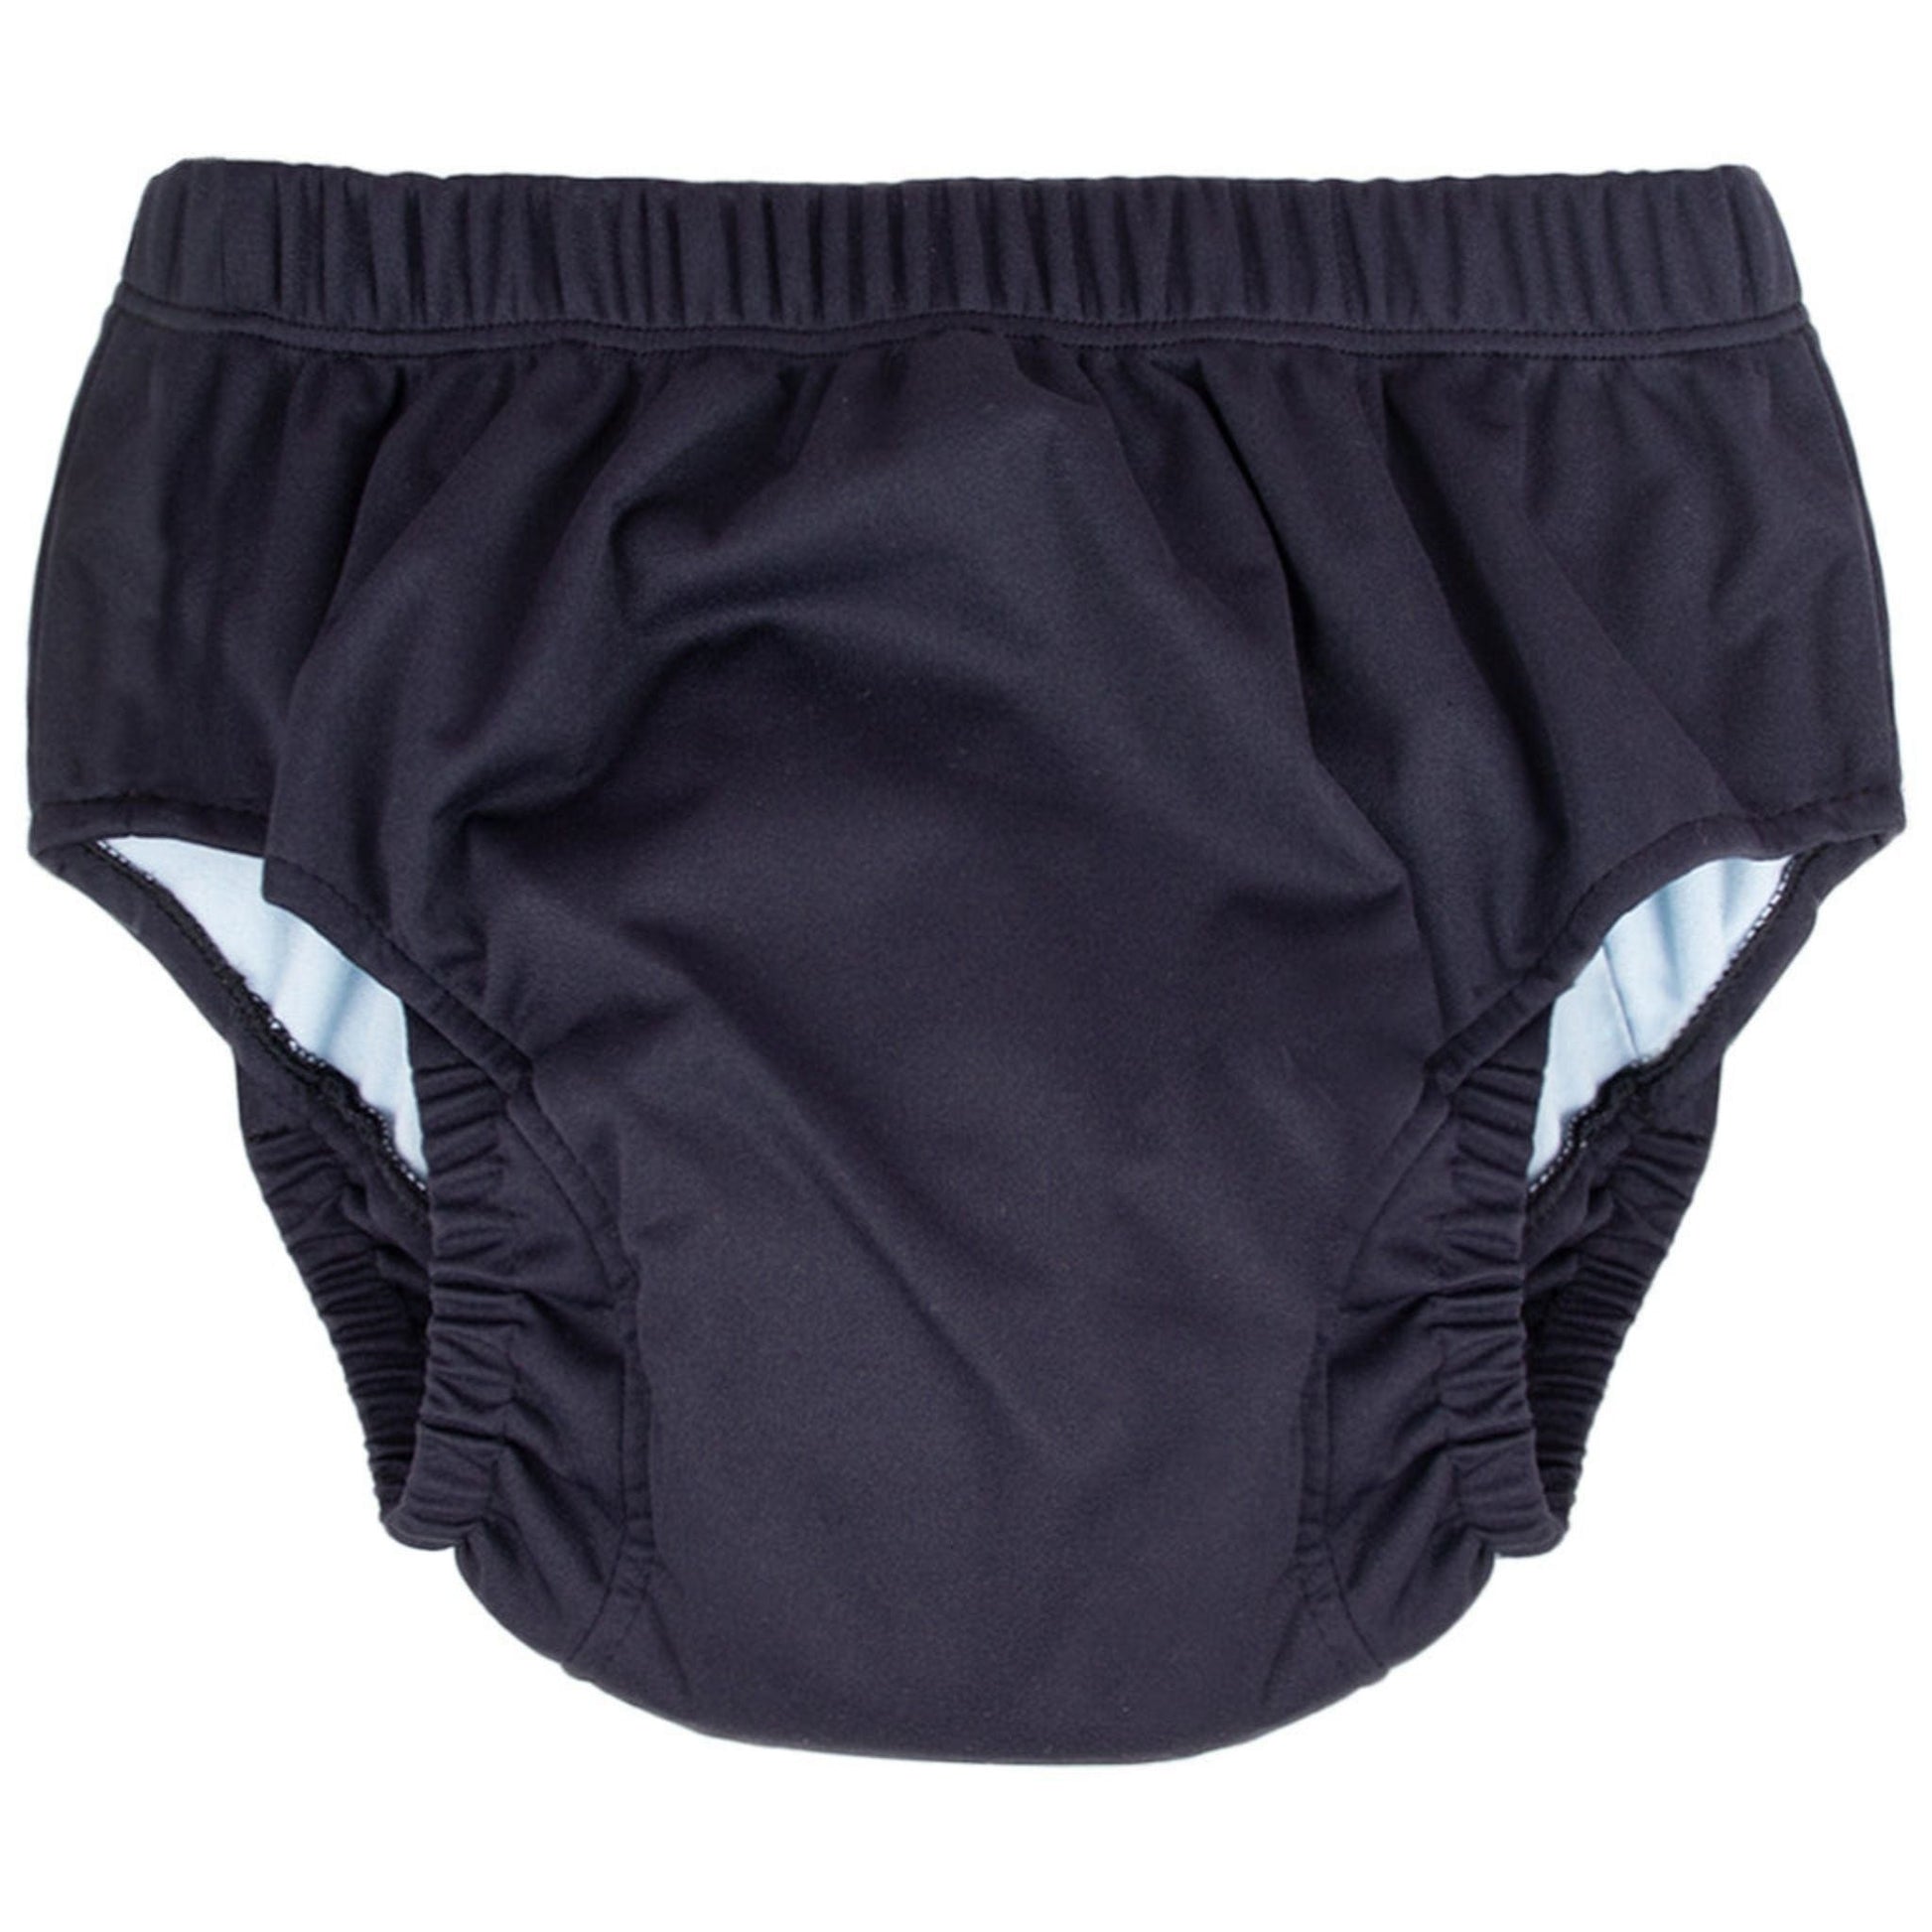 Adult Pull-up Heavy Night Incontinence Underwear (1000ml) - Caring Clothing